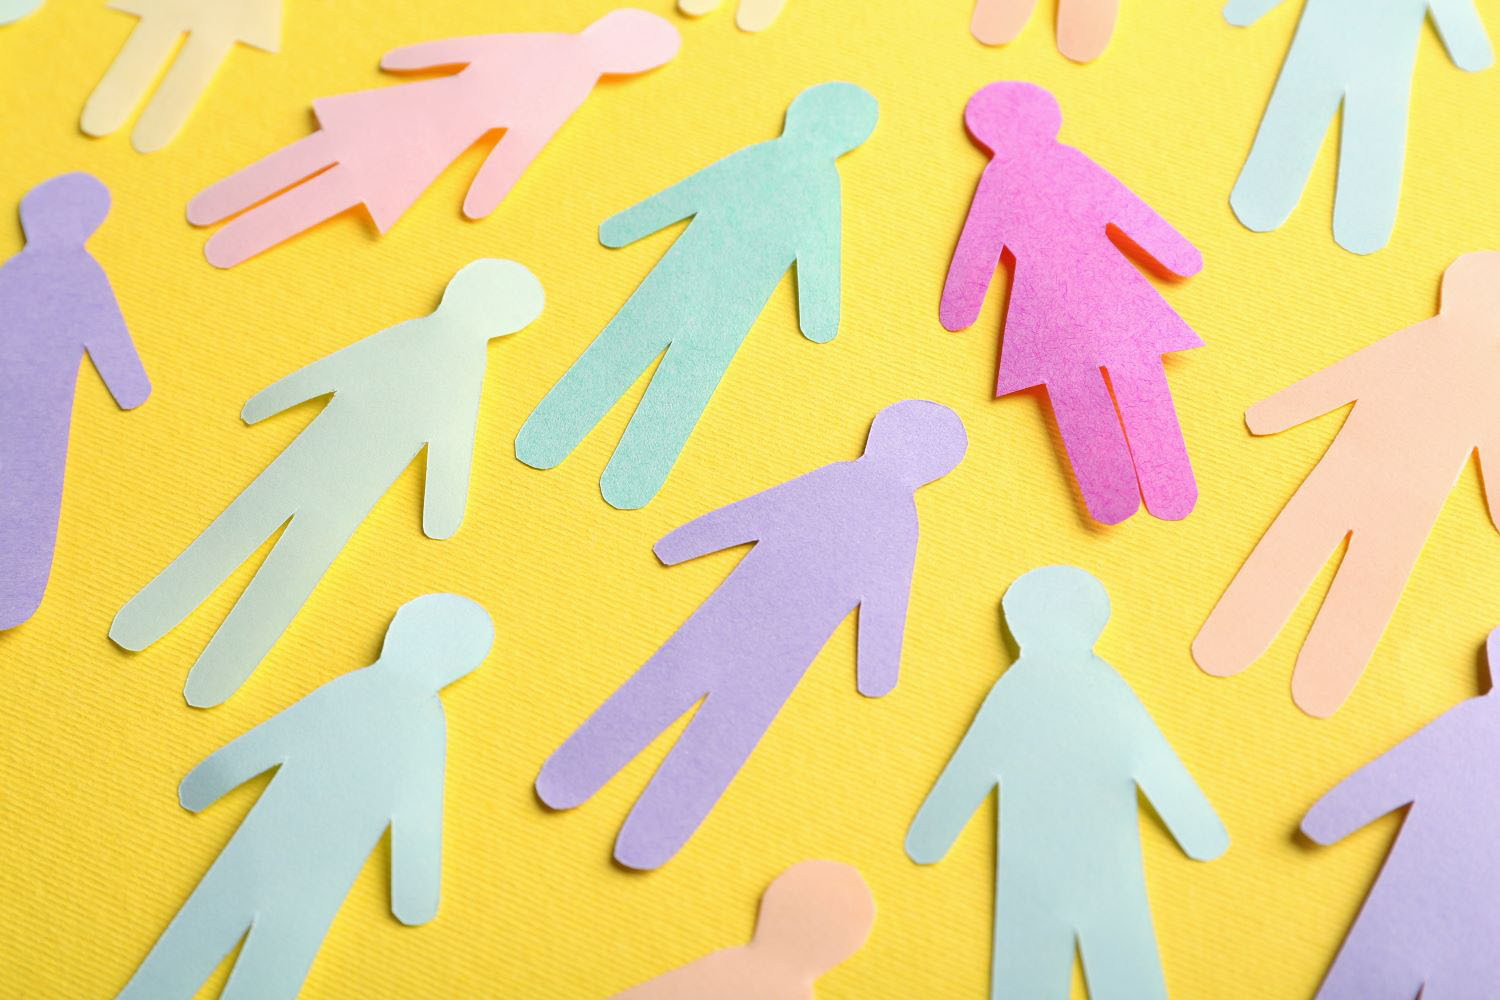 Many different paper human figures on yellow background. 